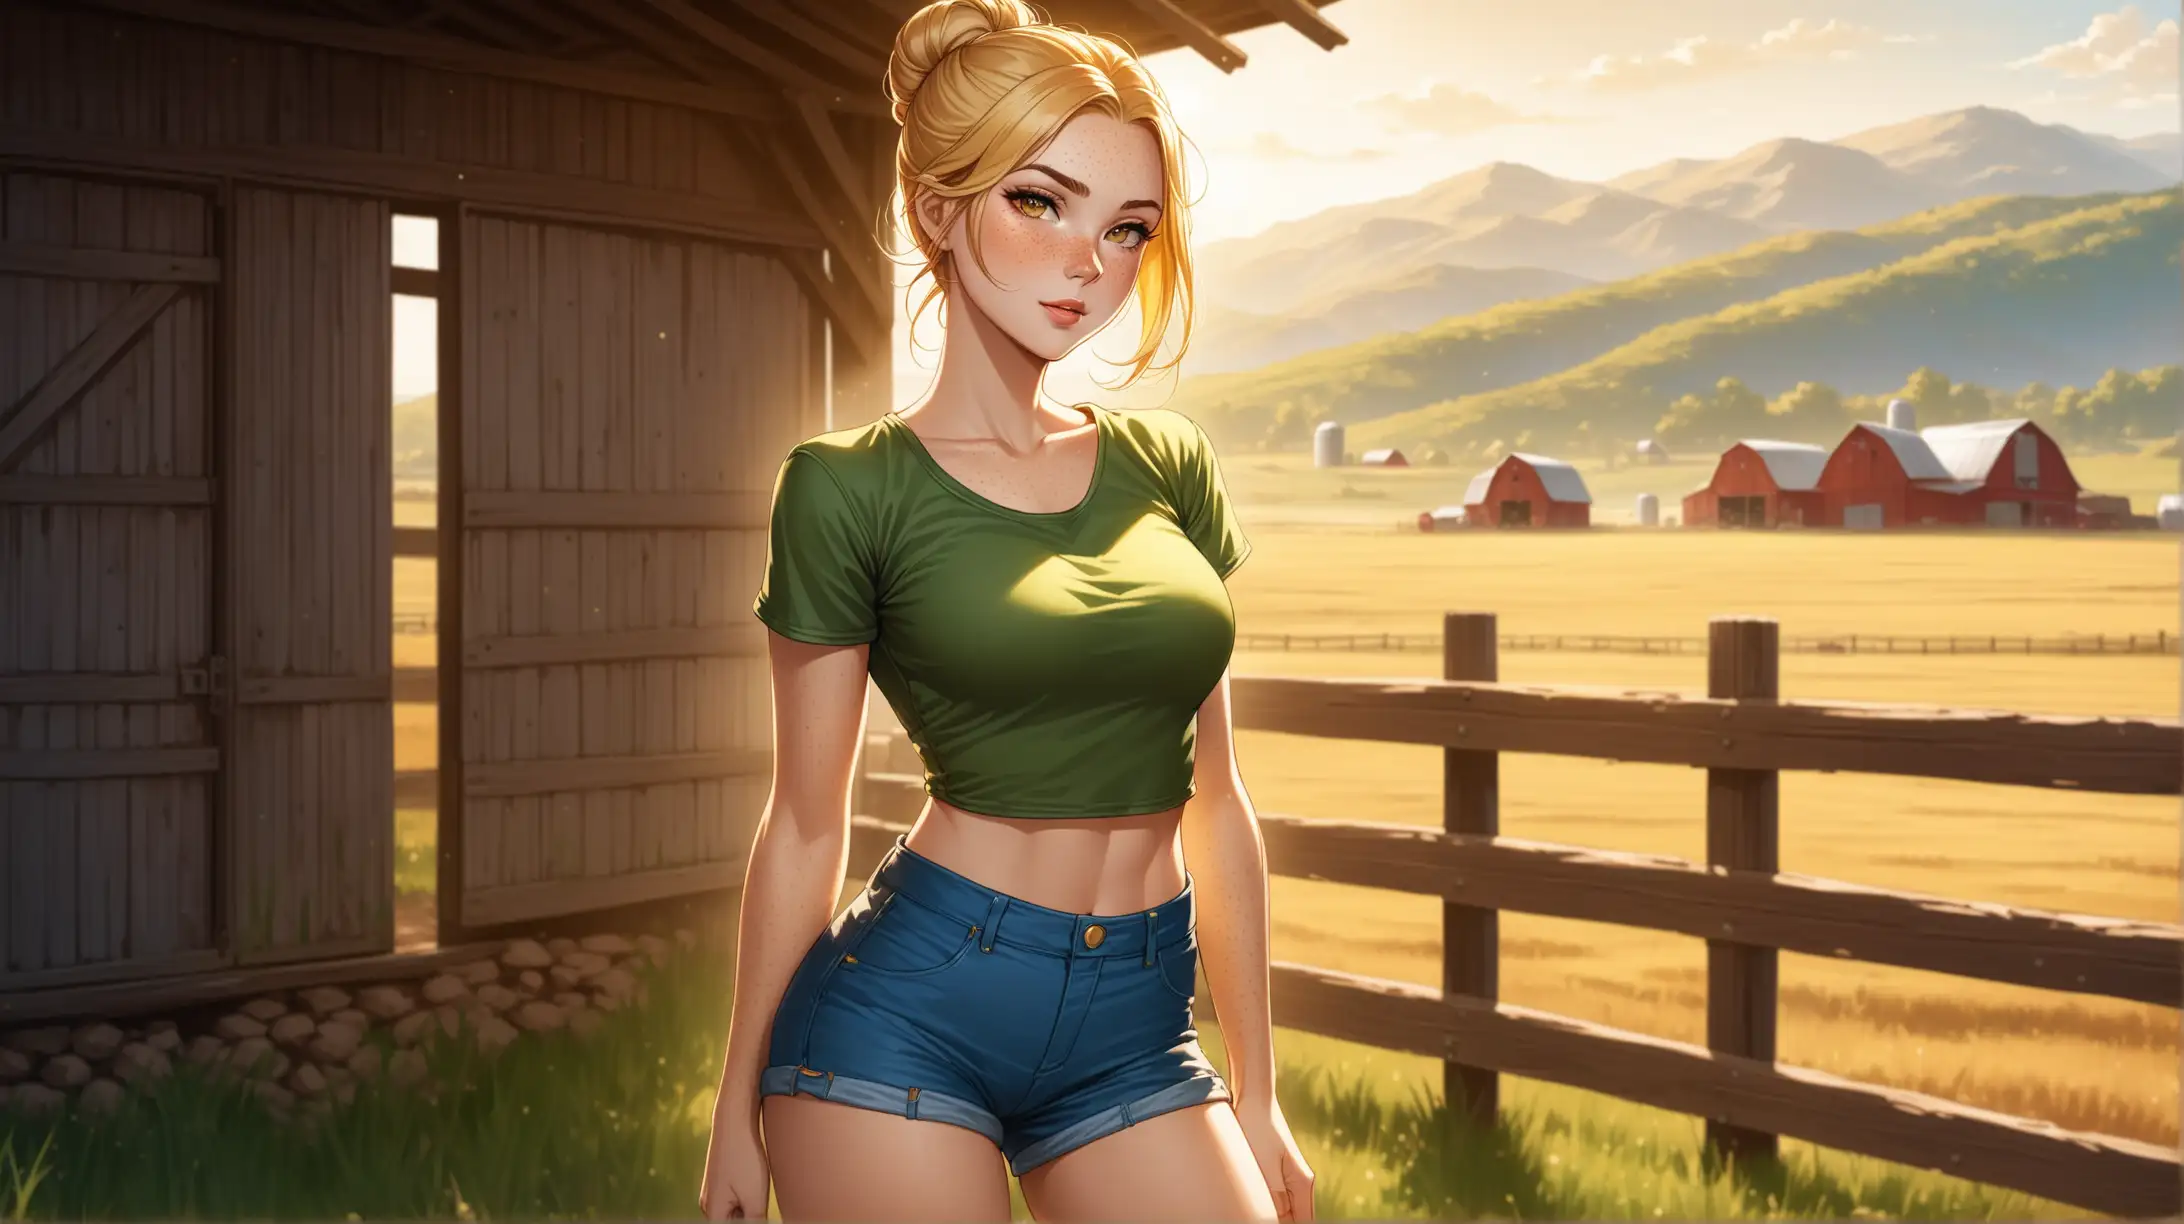 Blonde Woman in Fallout Inspired Attire Poses Seductively on Farm